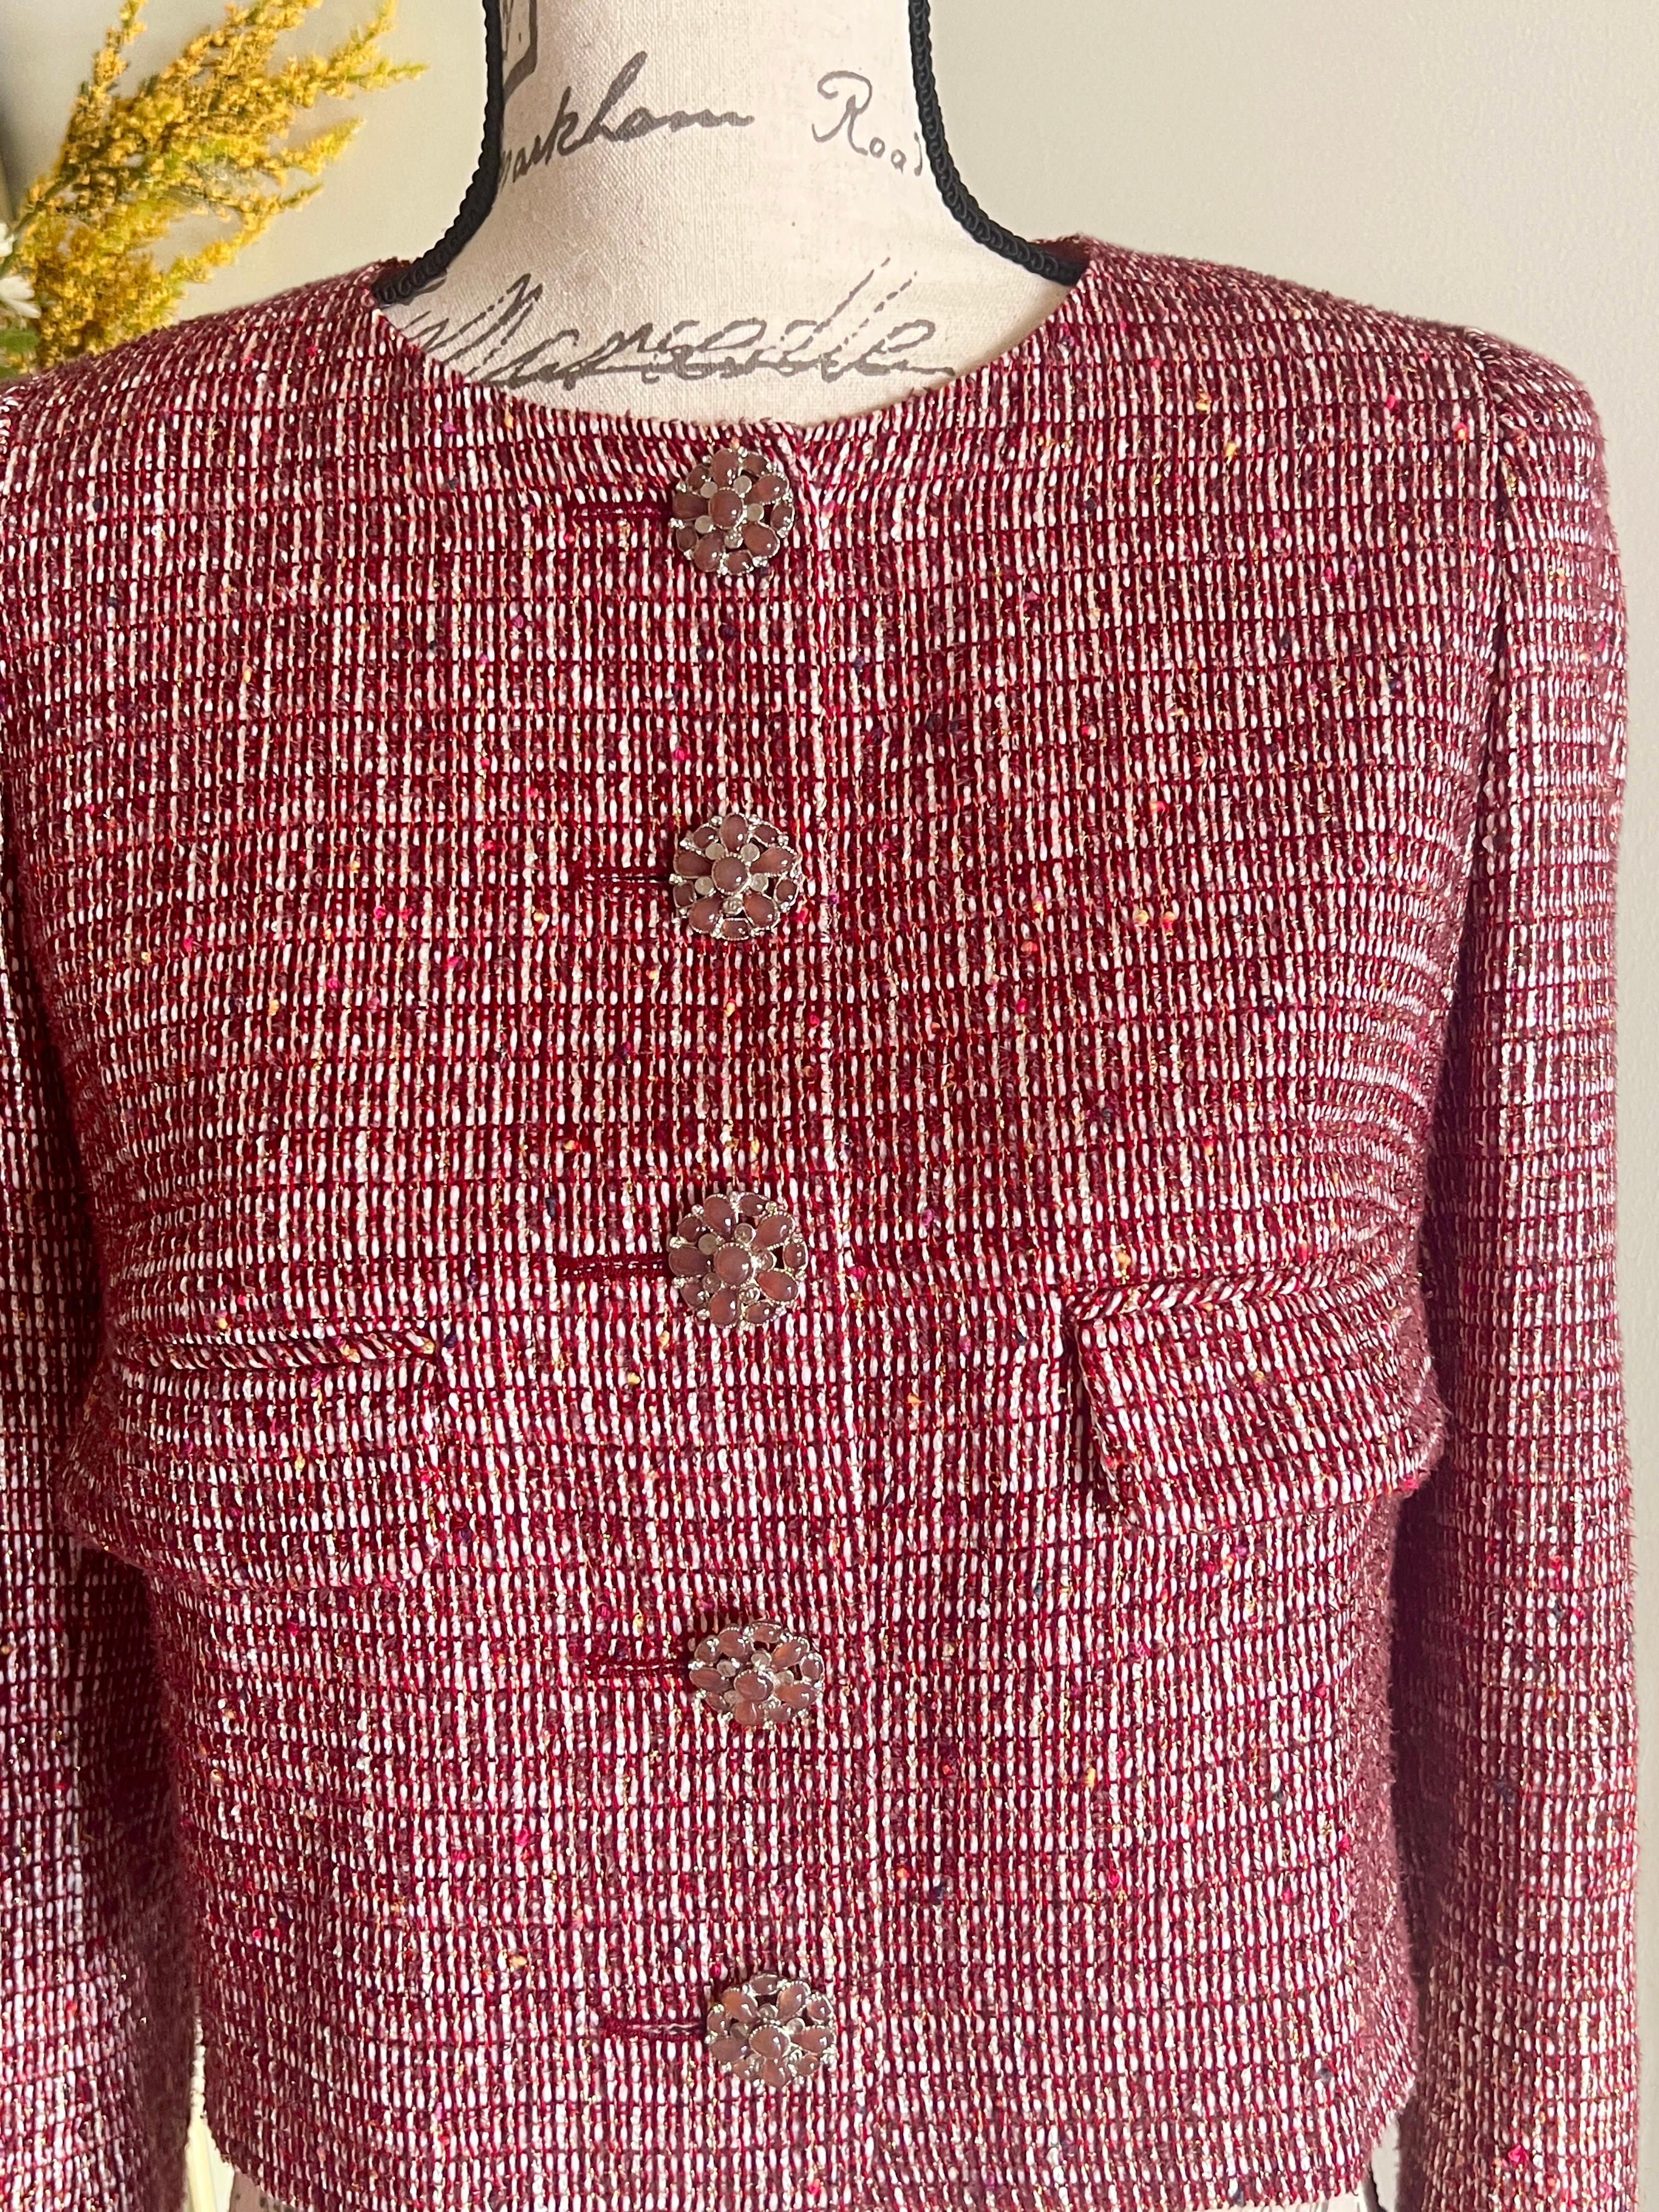 Chanel Dubai Collection Jewel Buttons Lesage Tweed Jacket 6